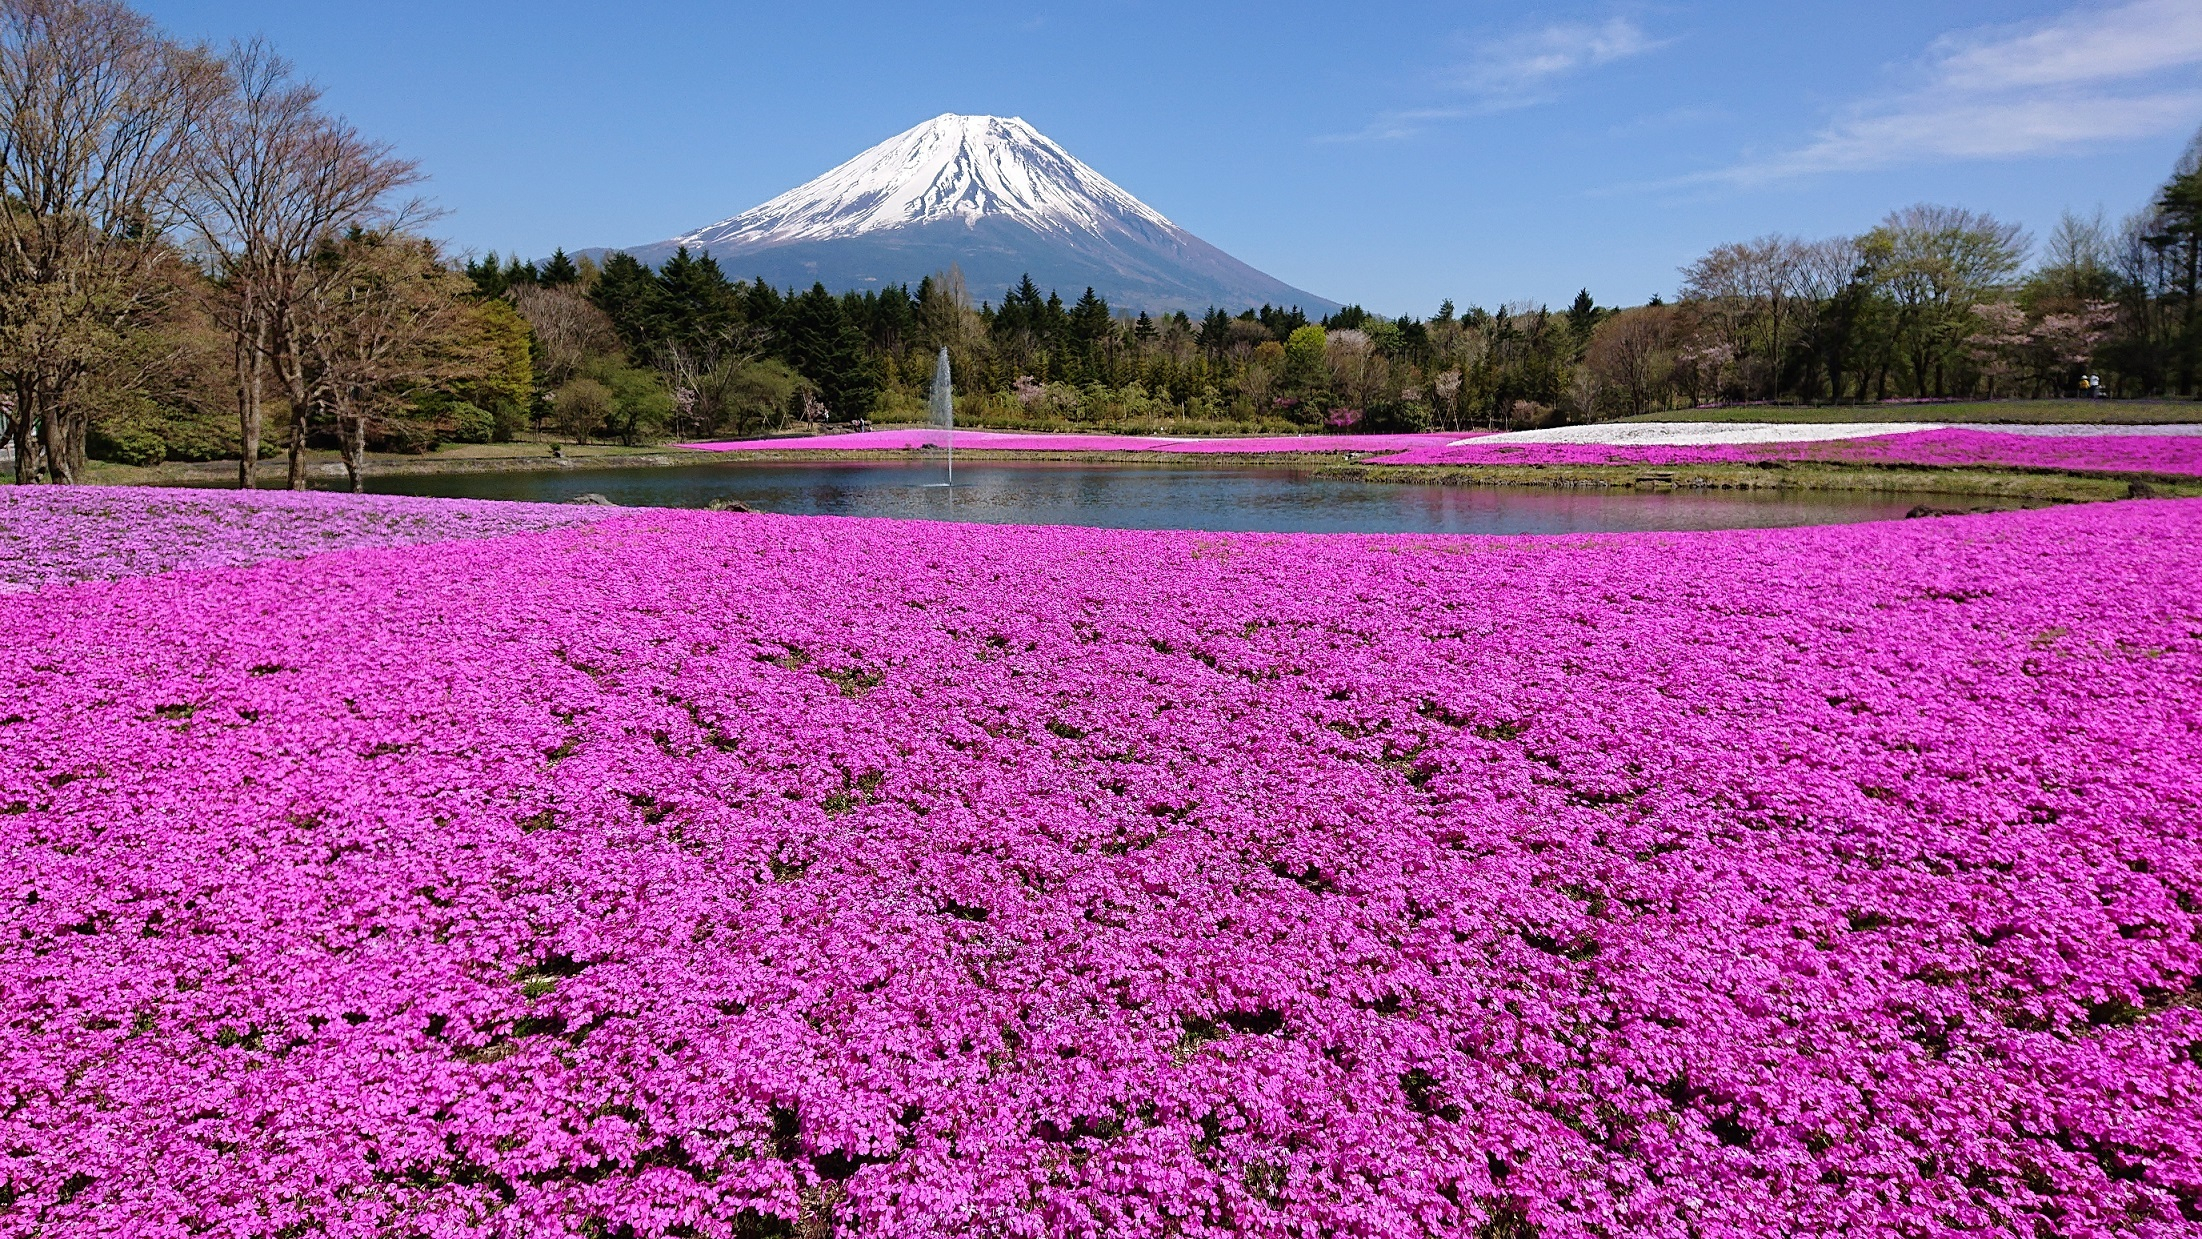 2202x1239 Get an iconic springtime view of Mt Fuji at this shibazakura flower festival